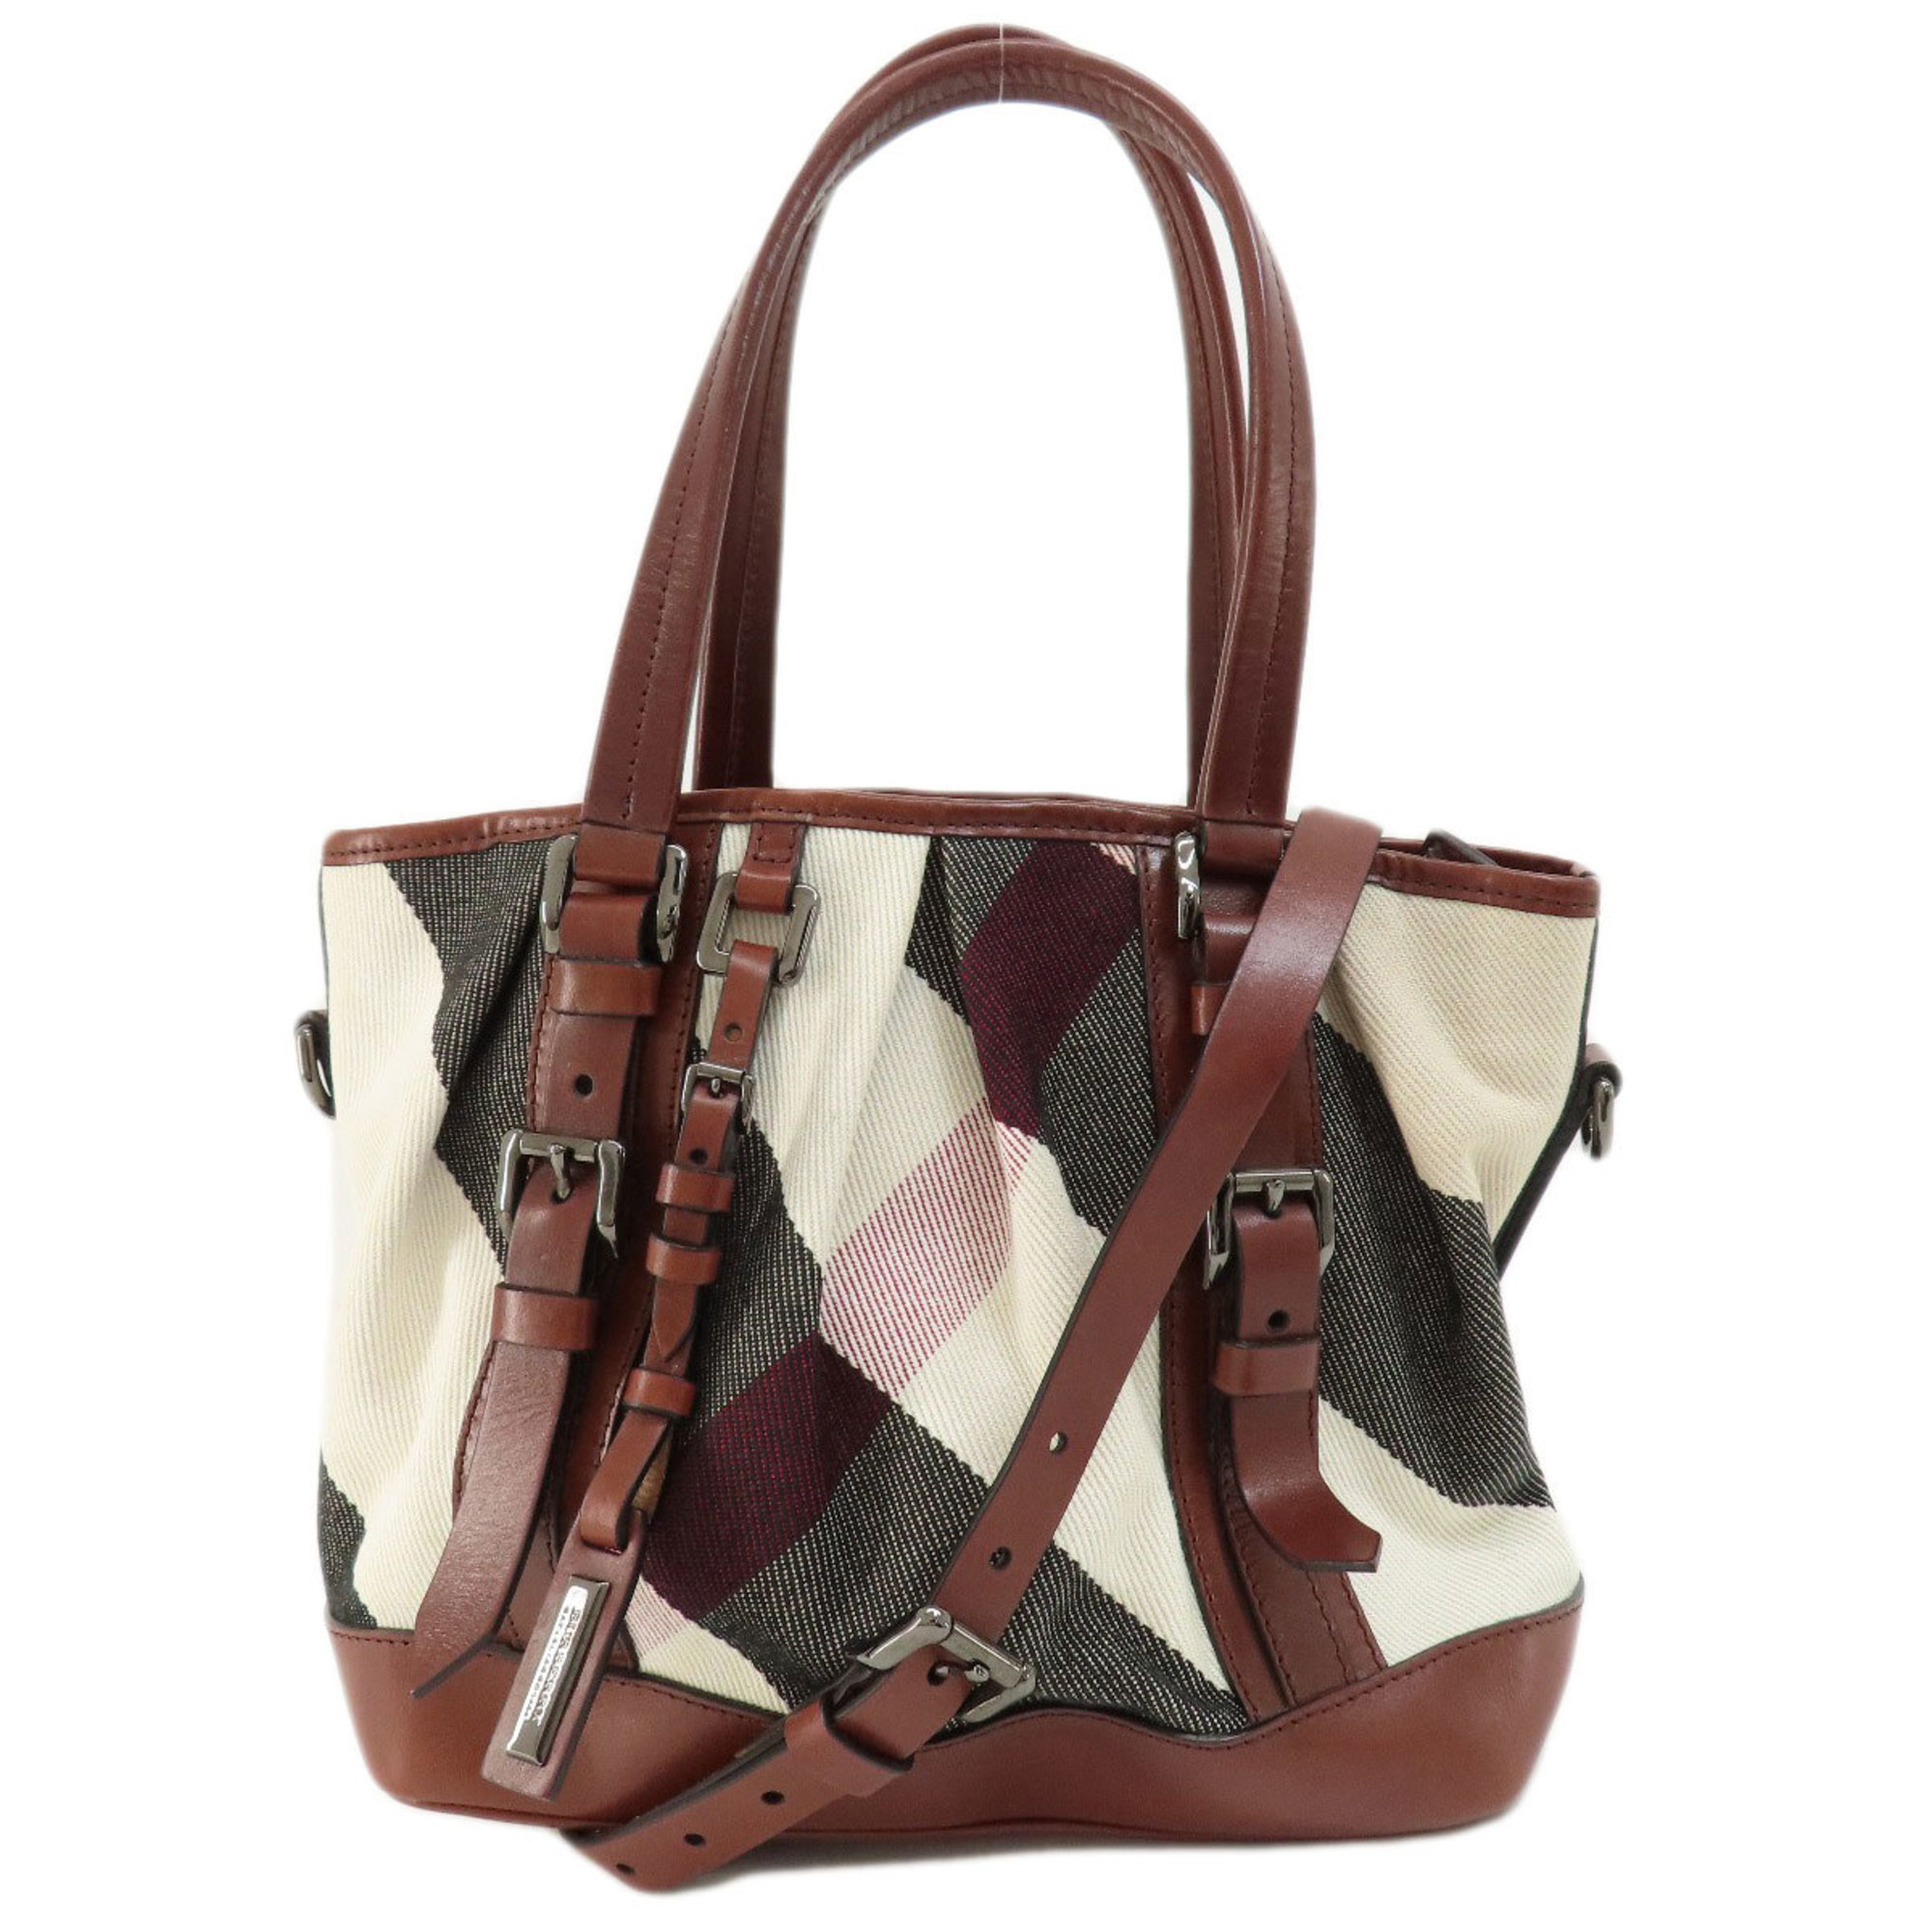 Burberry Check Pattern Tote Bag Canvas Women's BURBERRY